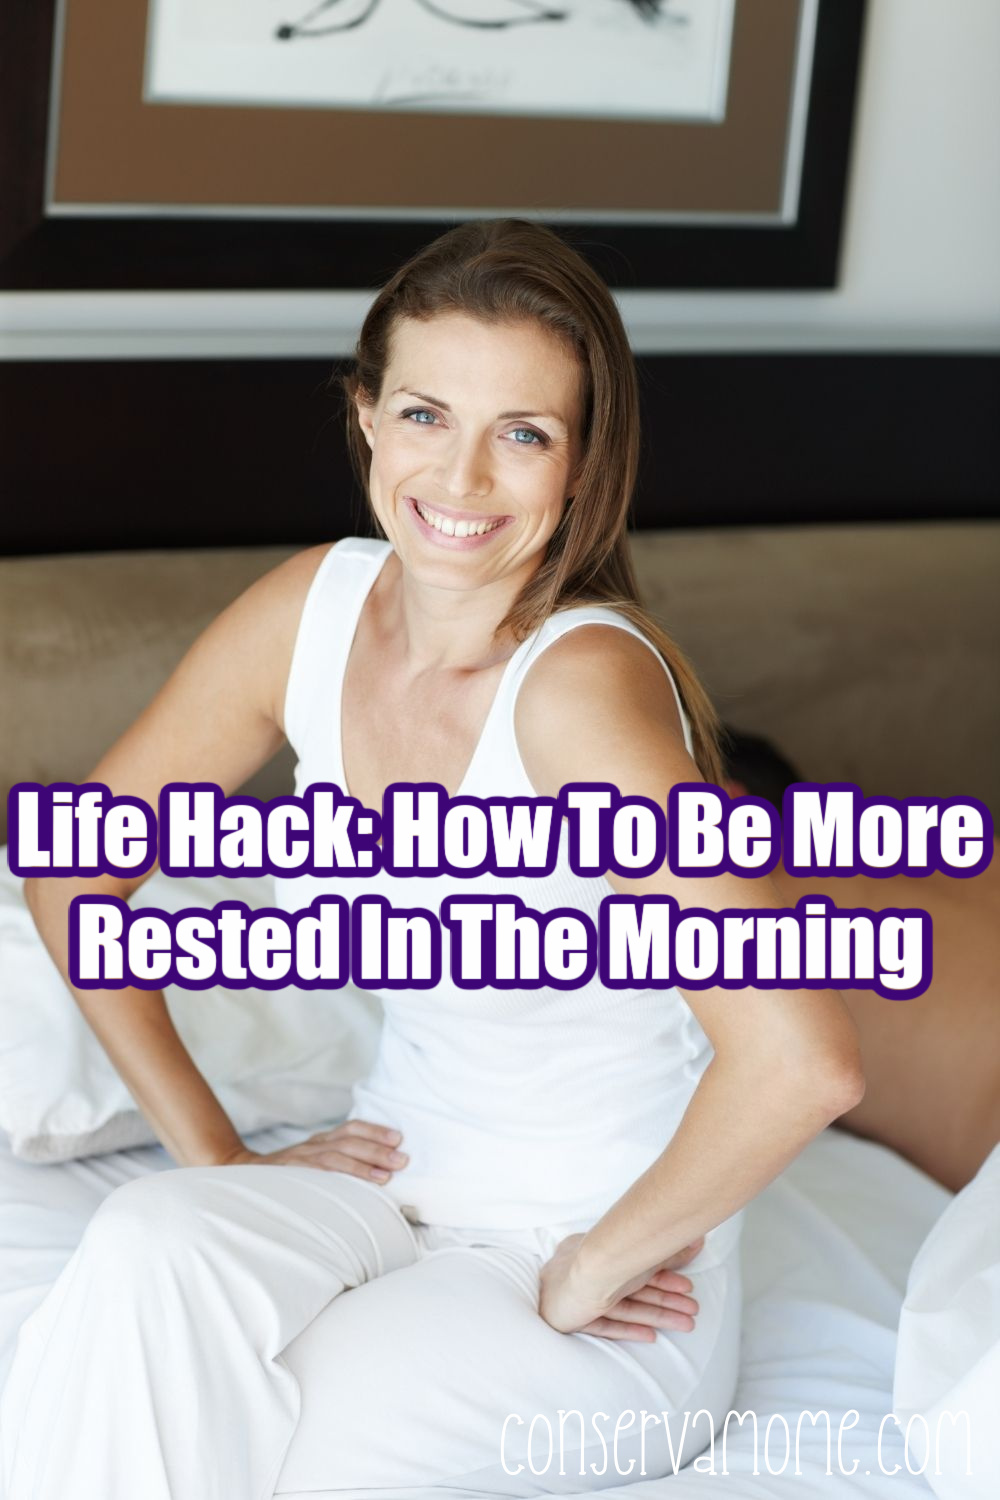 How to be more rested in the morning